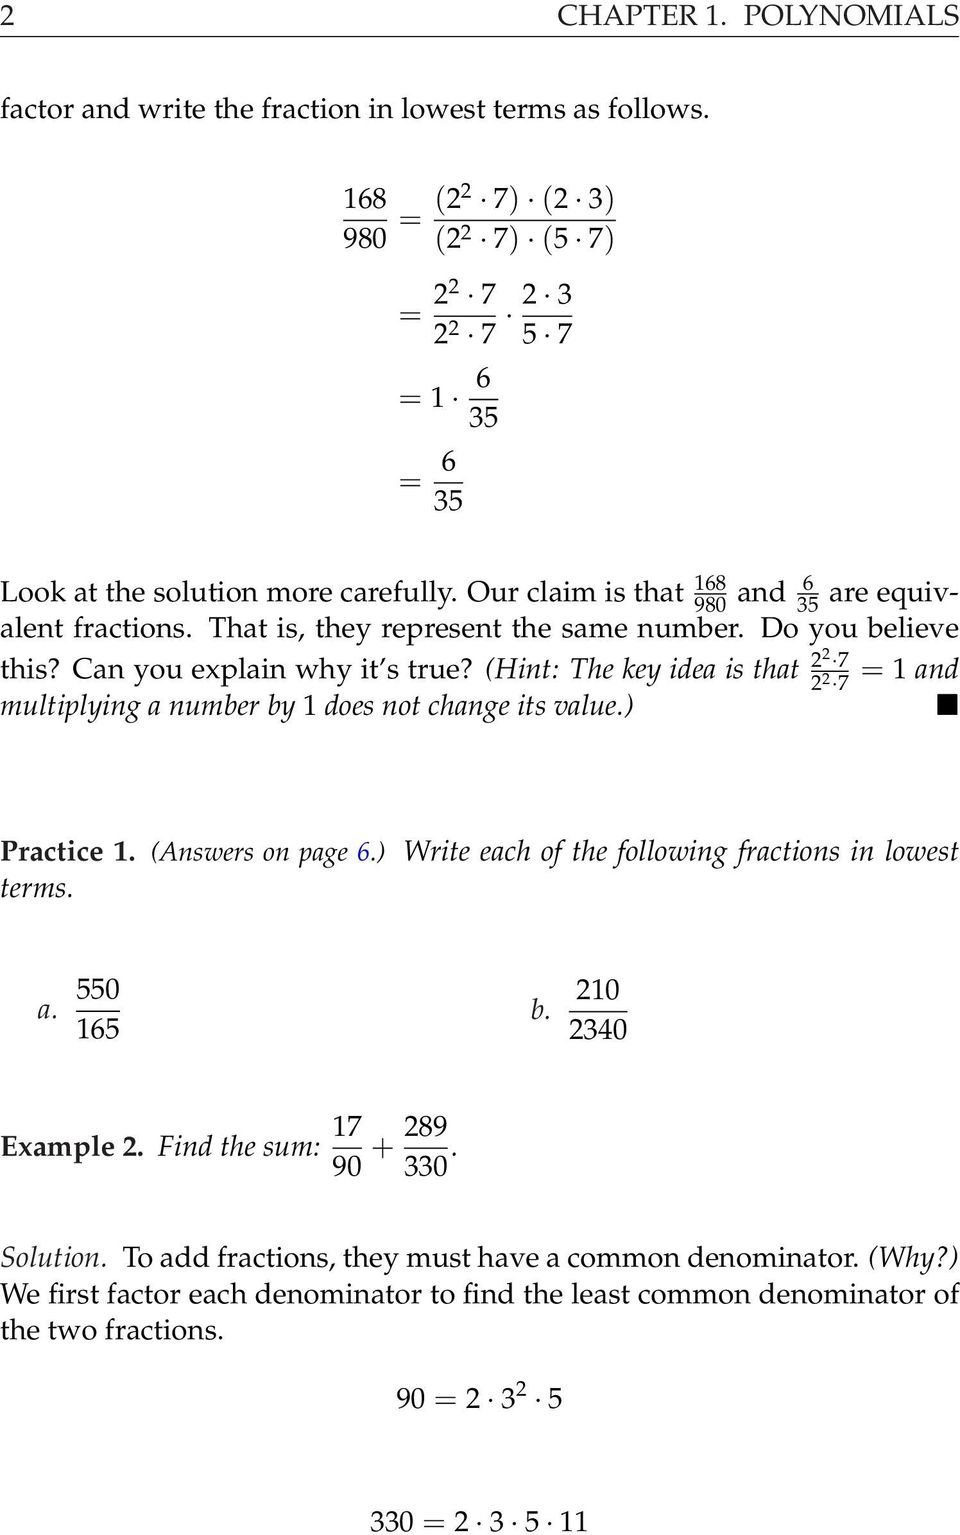 (Hint: The key idea is that 22 7 = and 22 7 multiplying a number by does not change its value.) Practice. (Answers on page 6.) Write each of the following fractions in lowest terms. a. 550 65 b.